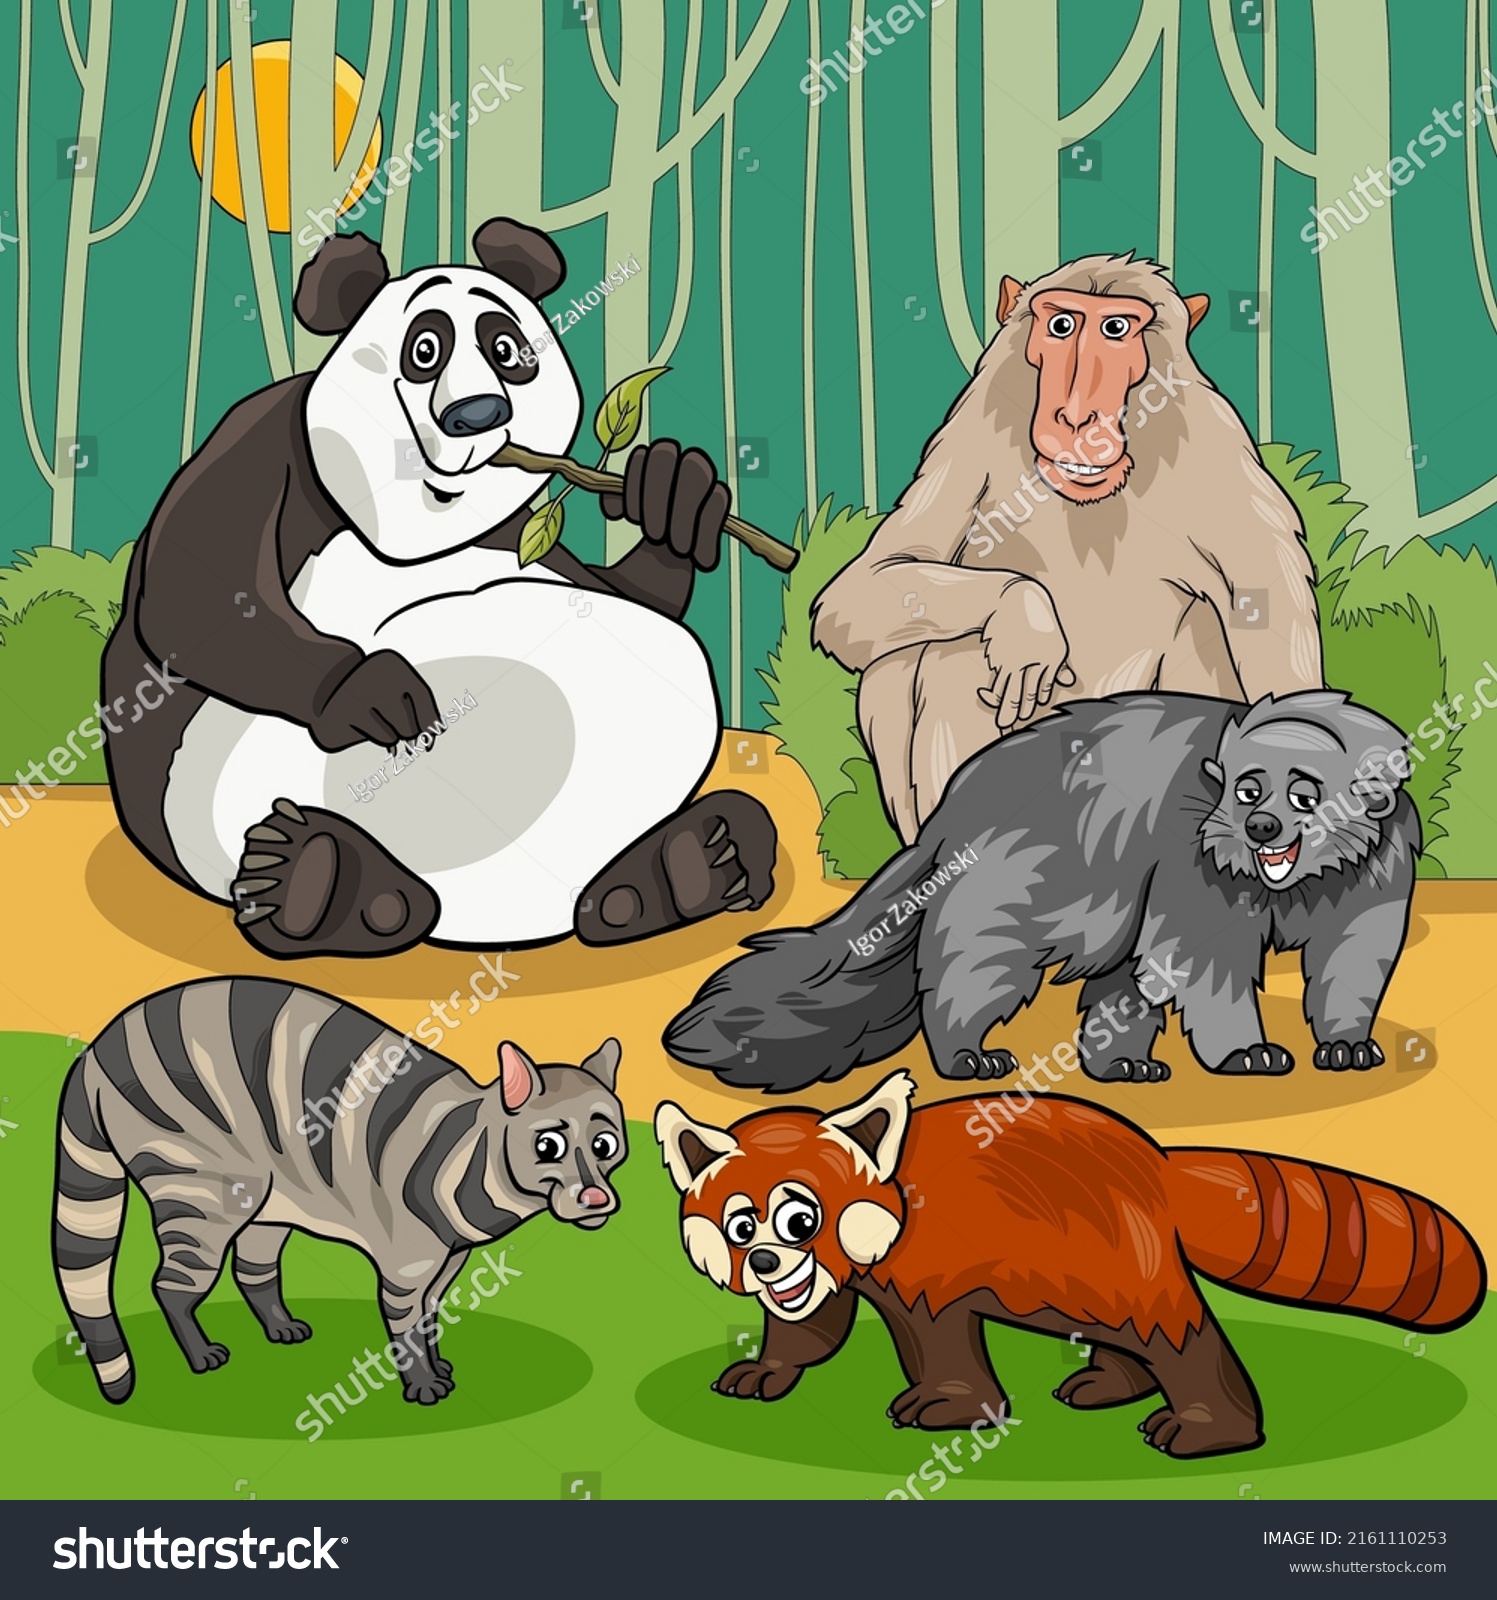 SVG of Cartoon illustrations of funny wild Asian animal characters group svg